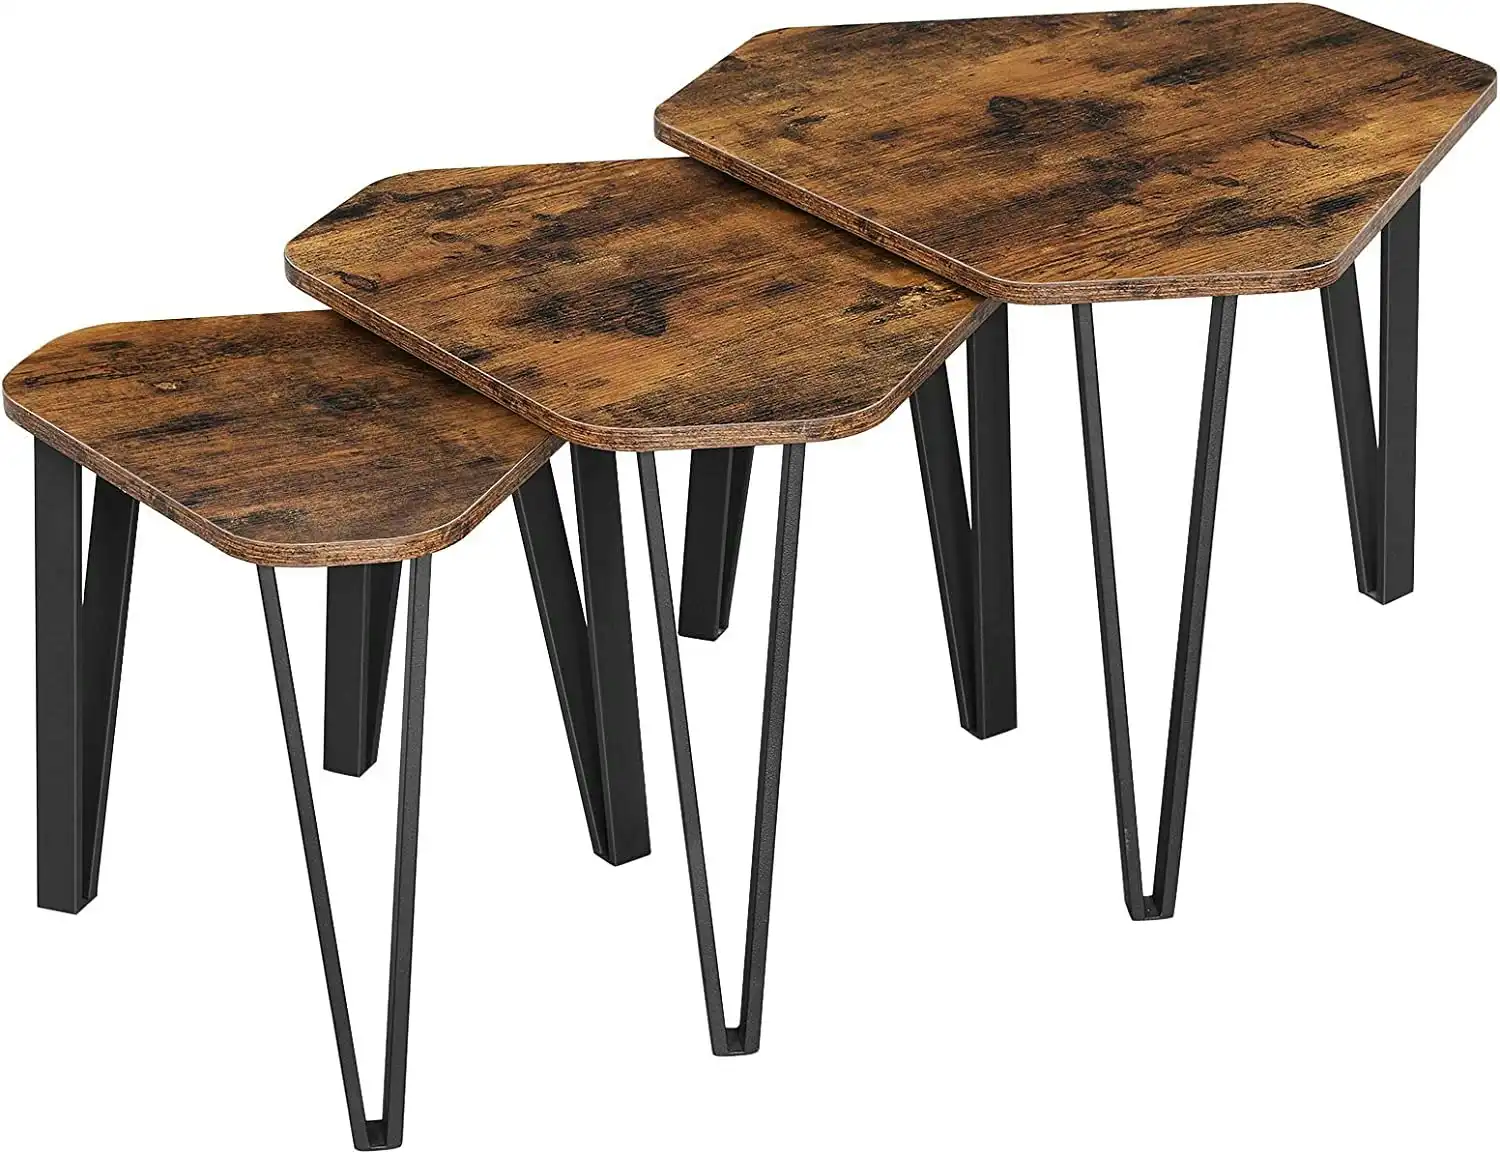 Rustic Brown and Black Nesting Coffee Table Set - 3 Sturdy and Easy to Assemble End Tables